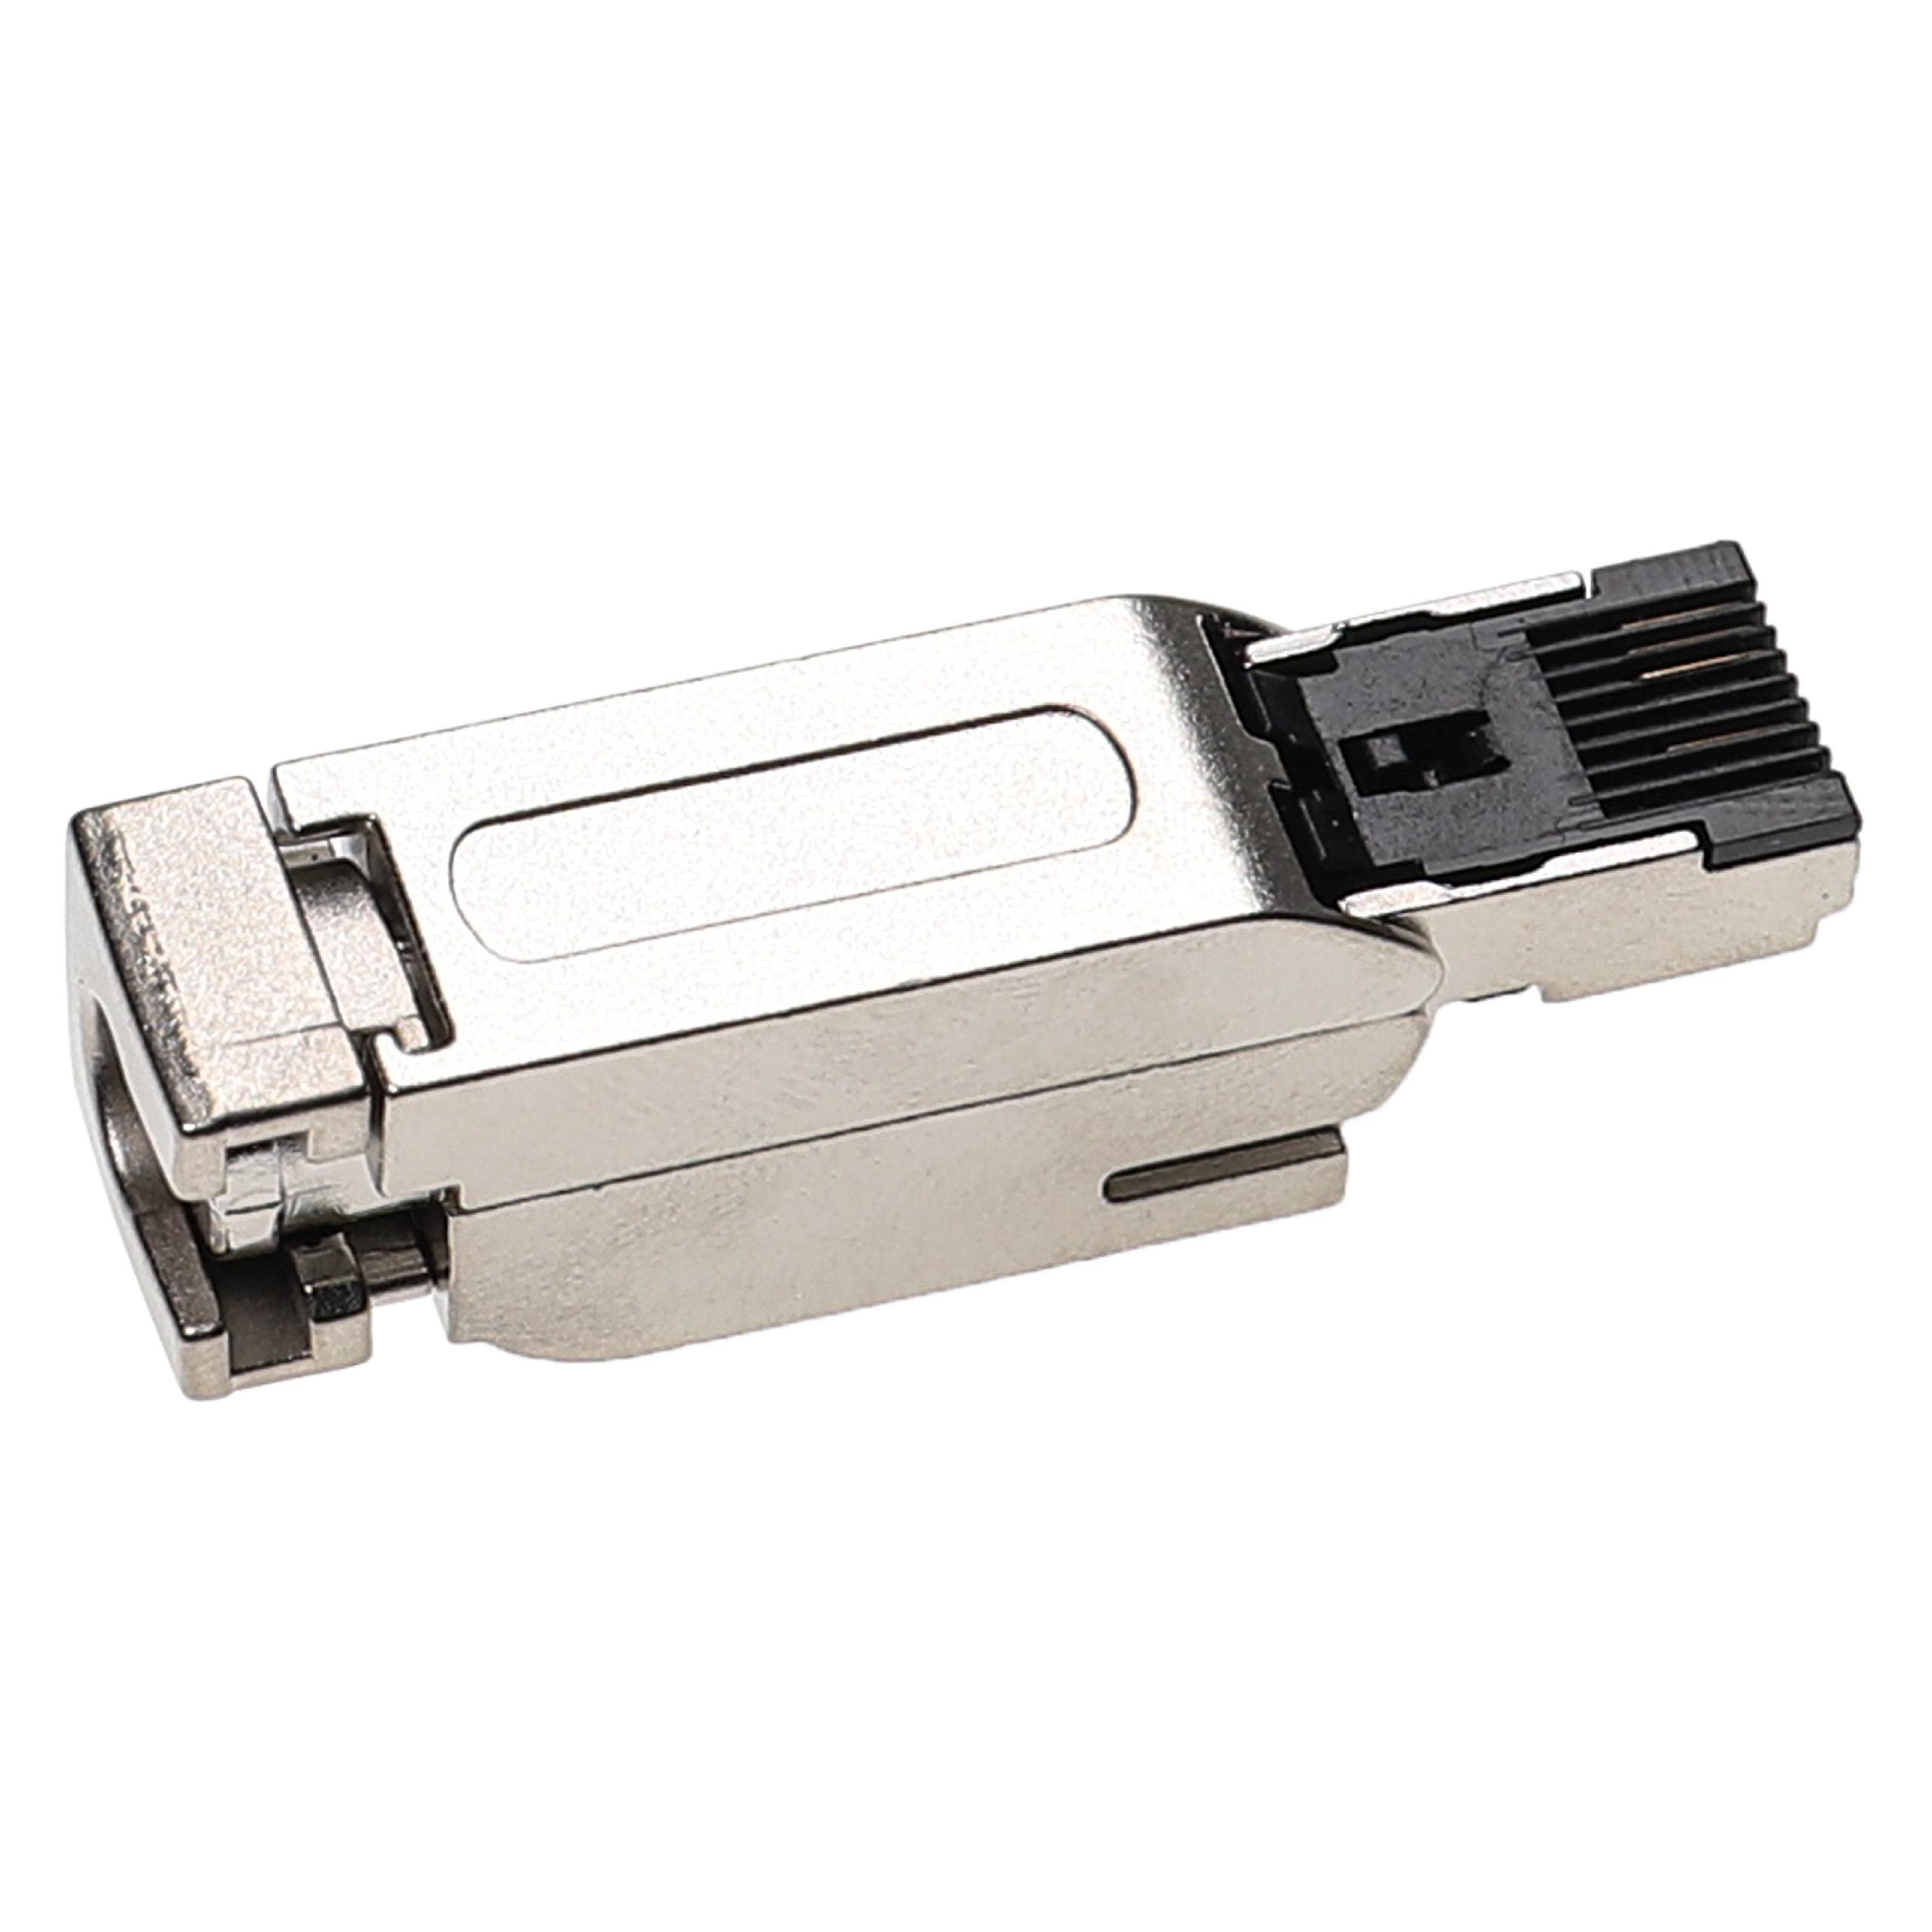 Spina RJ45 sostituisce Siemens Profinet 6GK1901-1BB10-2AA0 cavo Ethernet - Connettore a spina, dritto